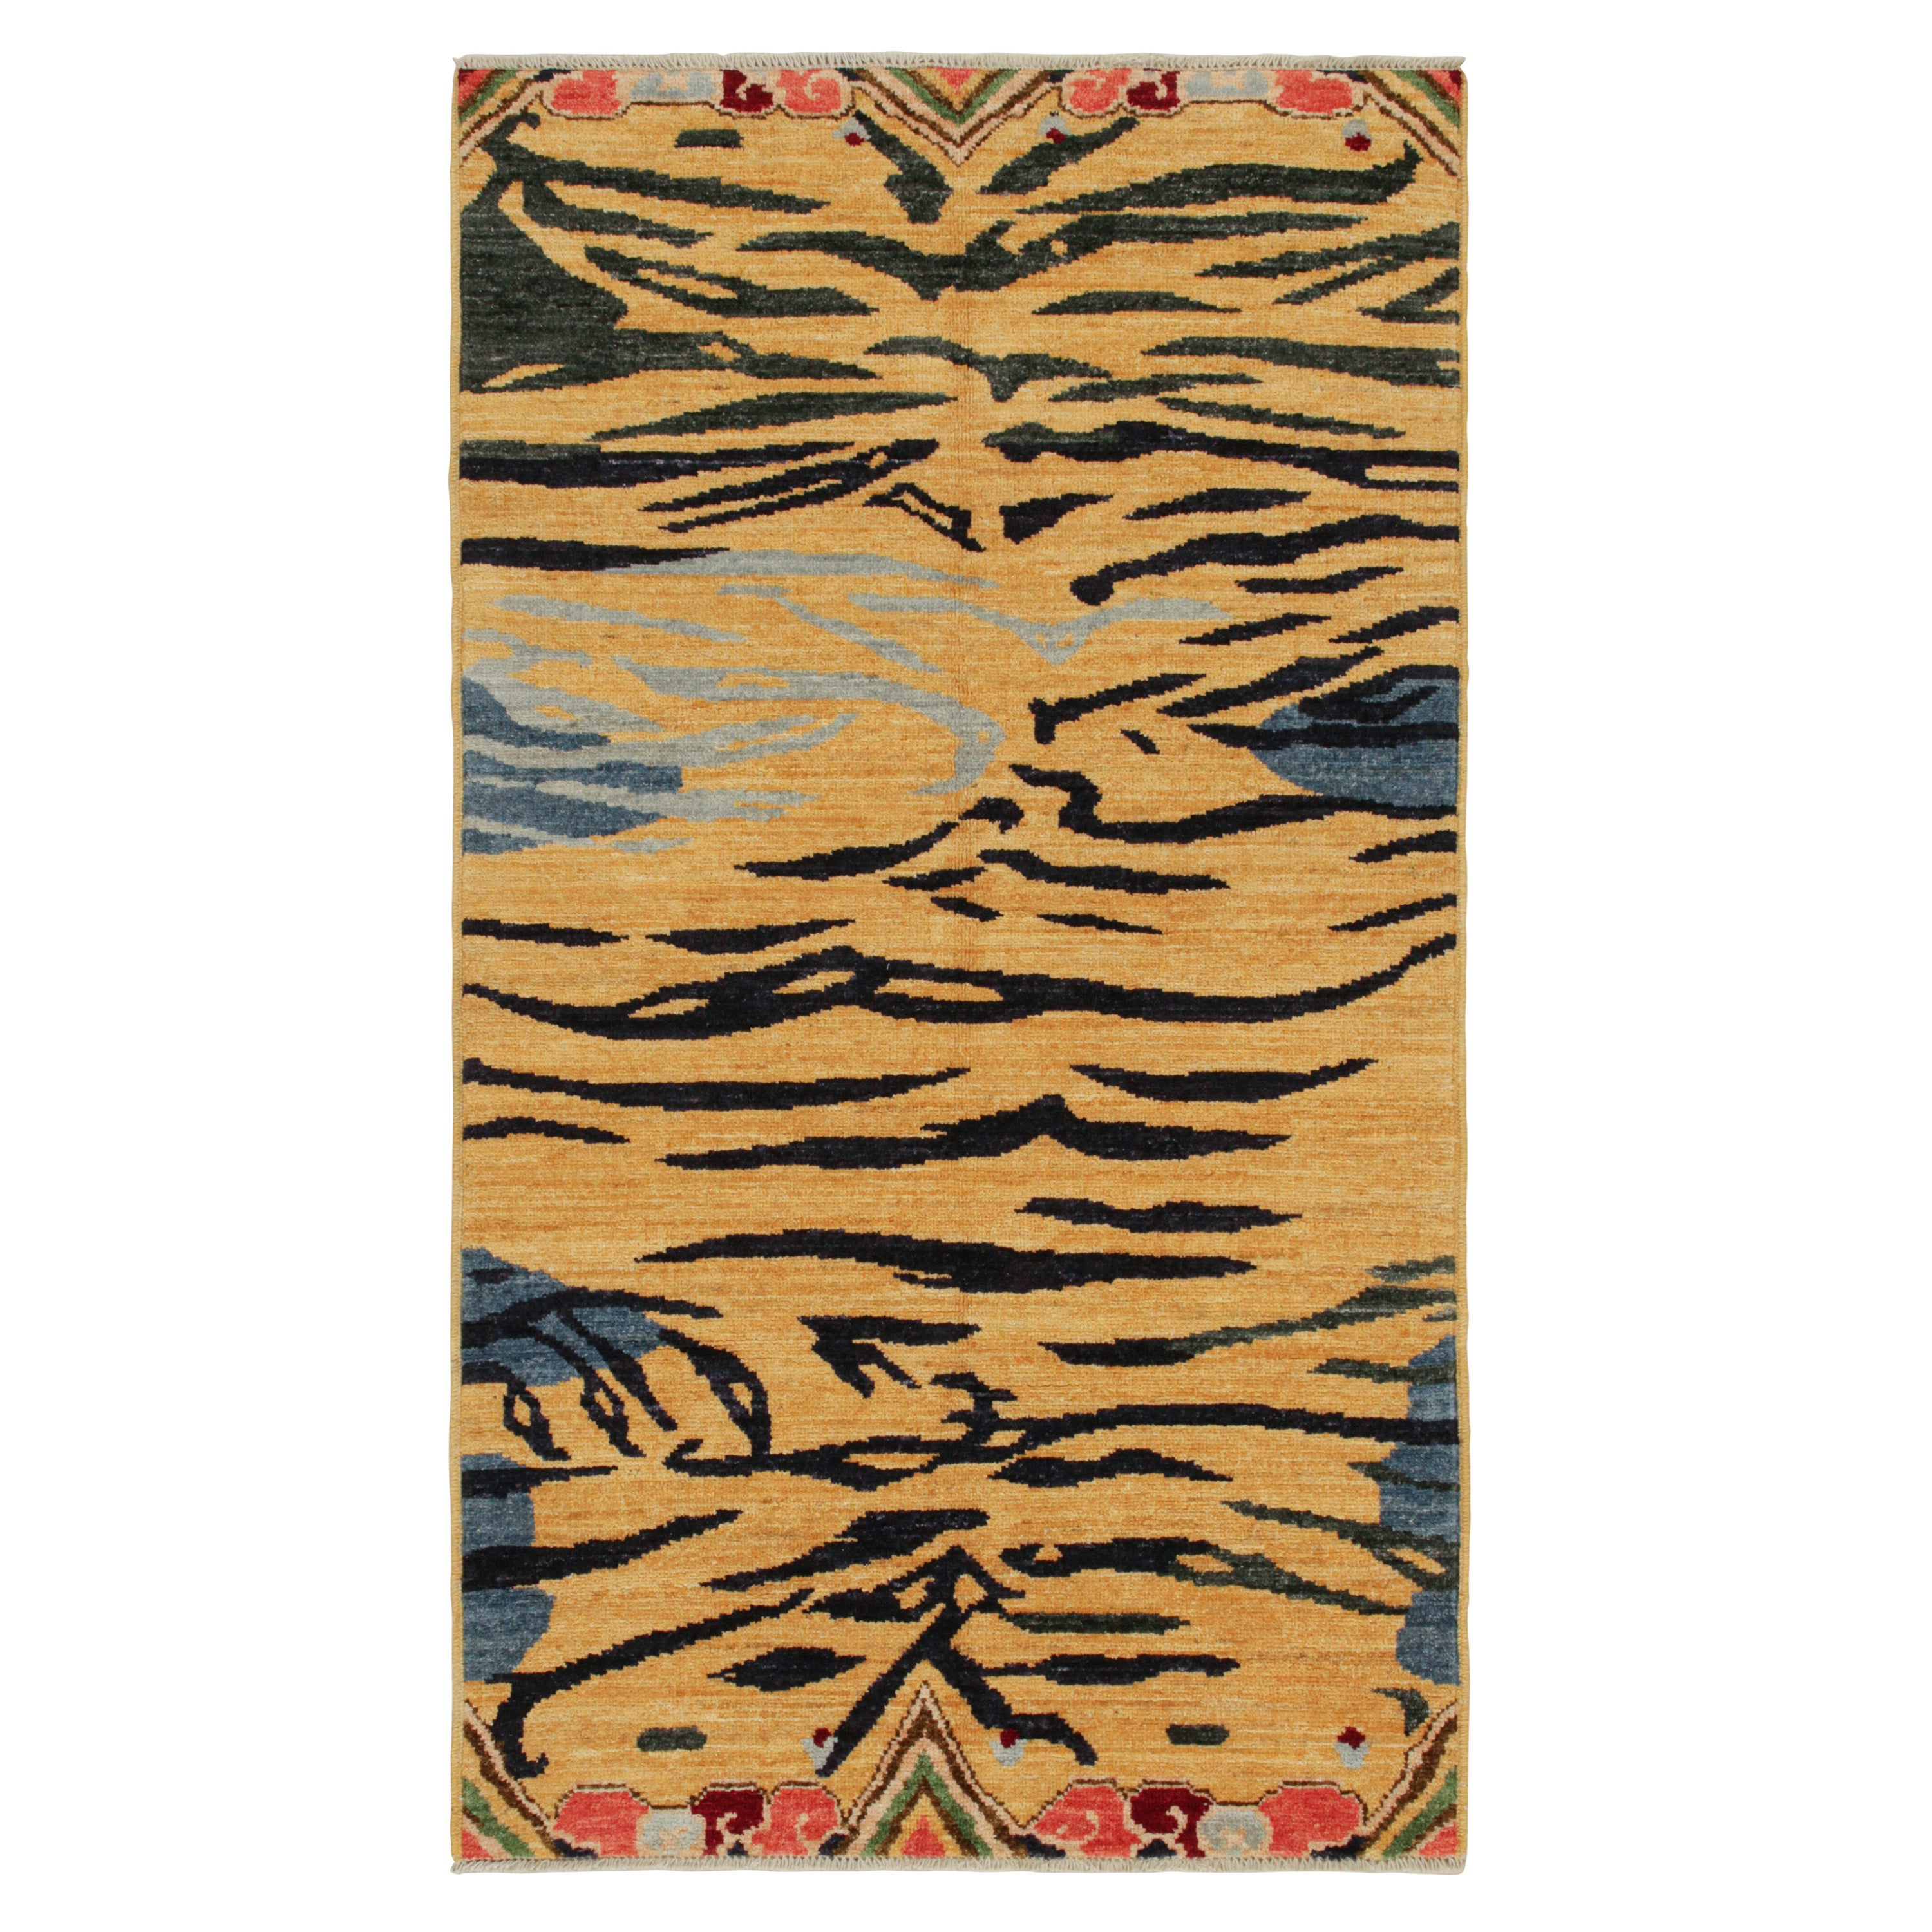 Tapis & Kilim's Classic Style Tiger-Skin Runner in Gold with Gray and Blue Stripes (Tapis & Kilim's Classic Style Tiger-Skin Runner in Gold with Gray and Blue Stripes) en vente